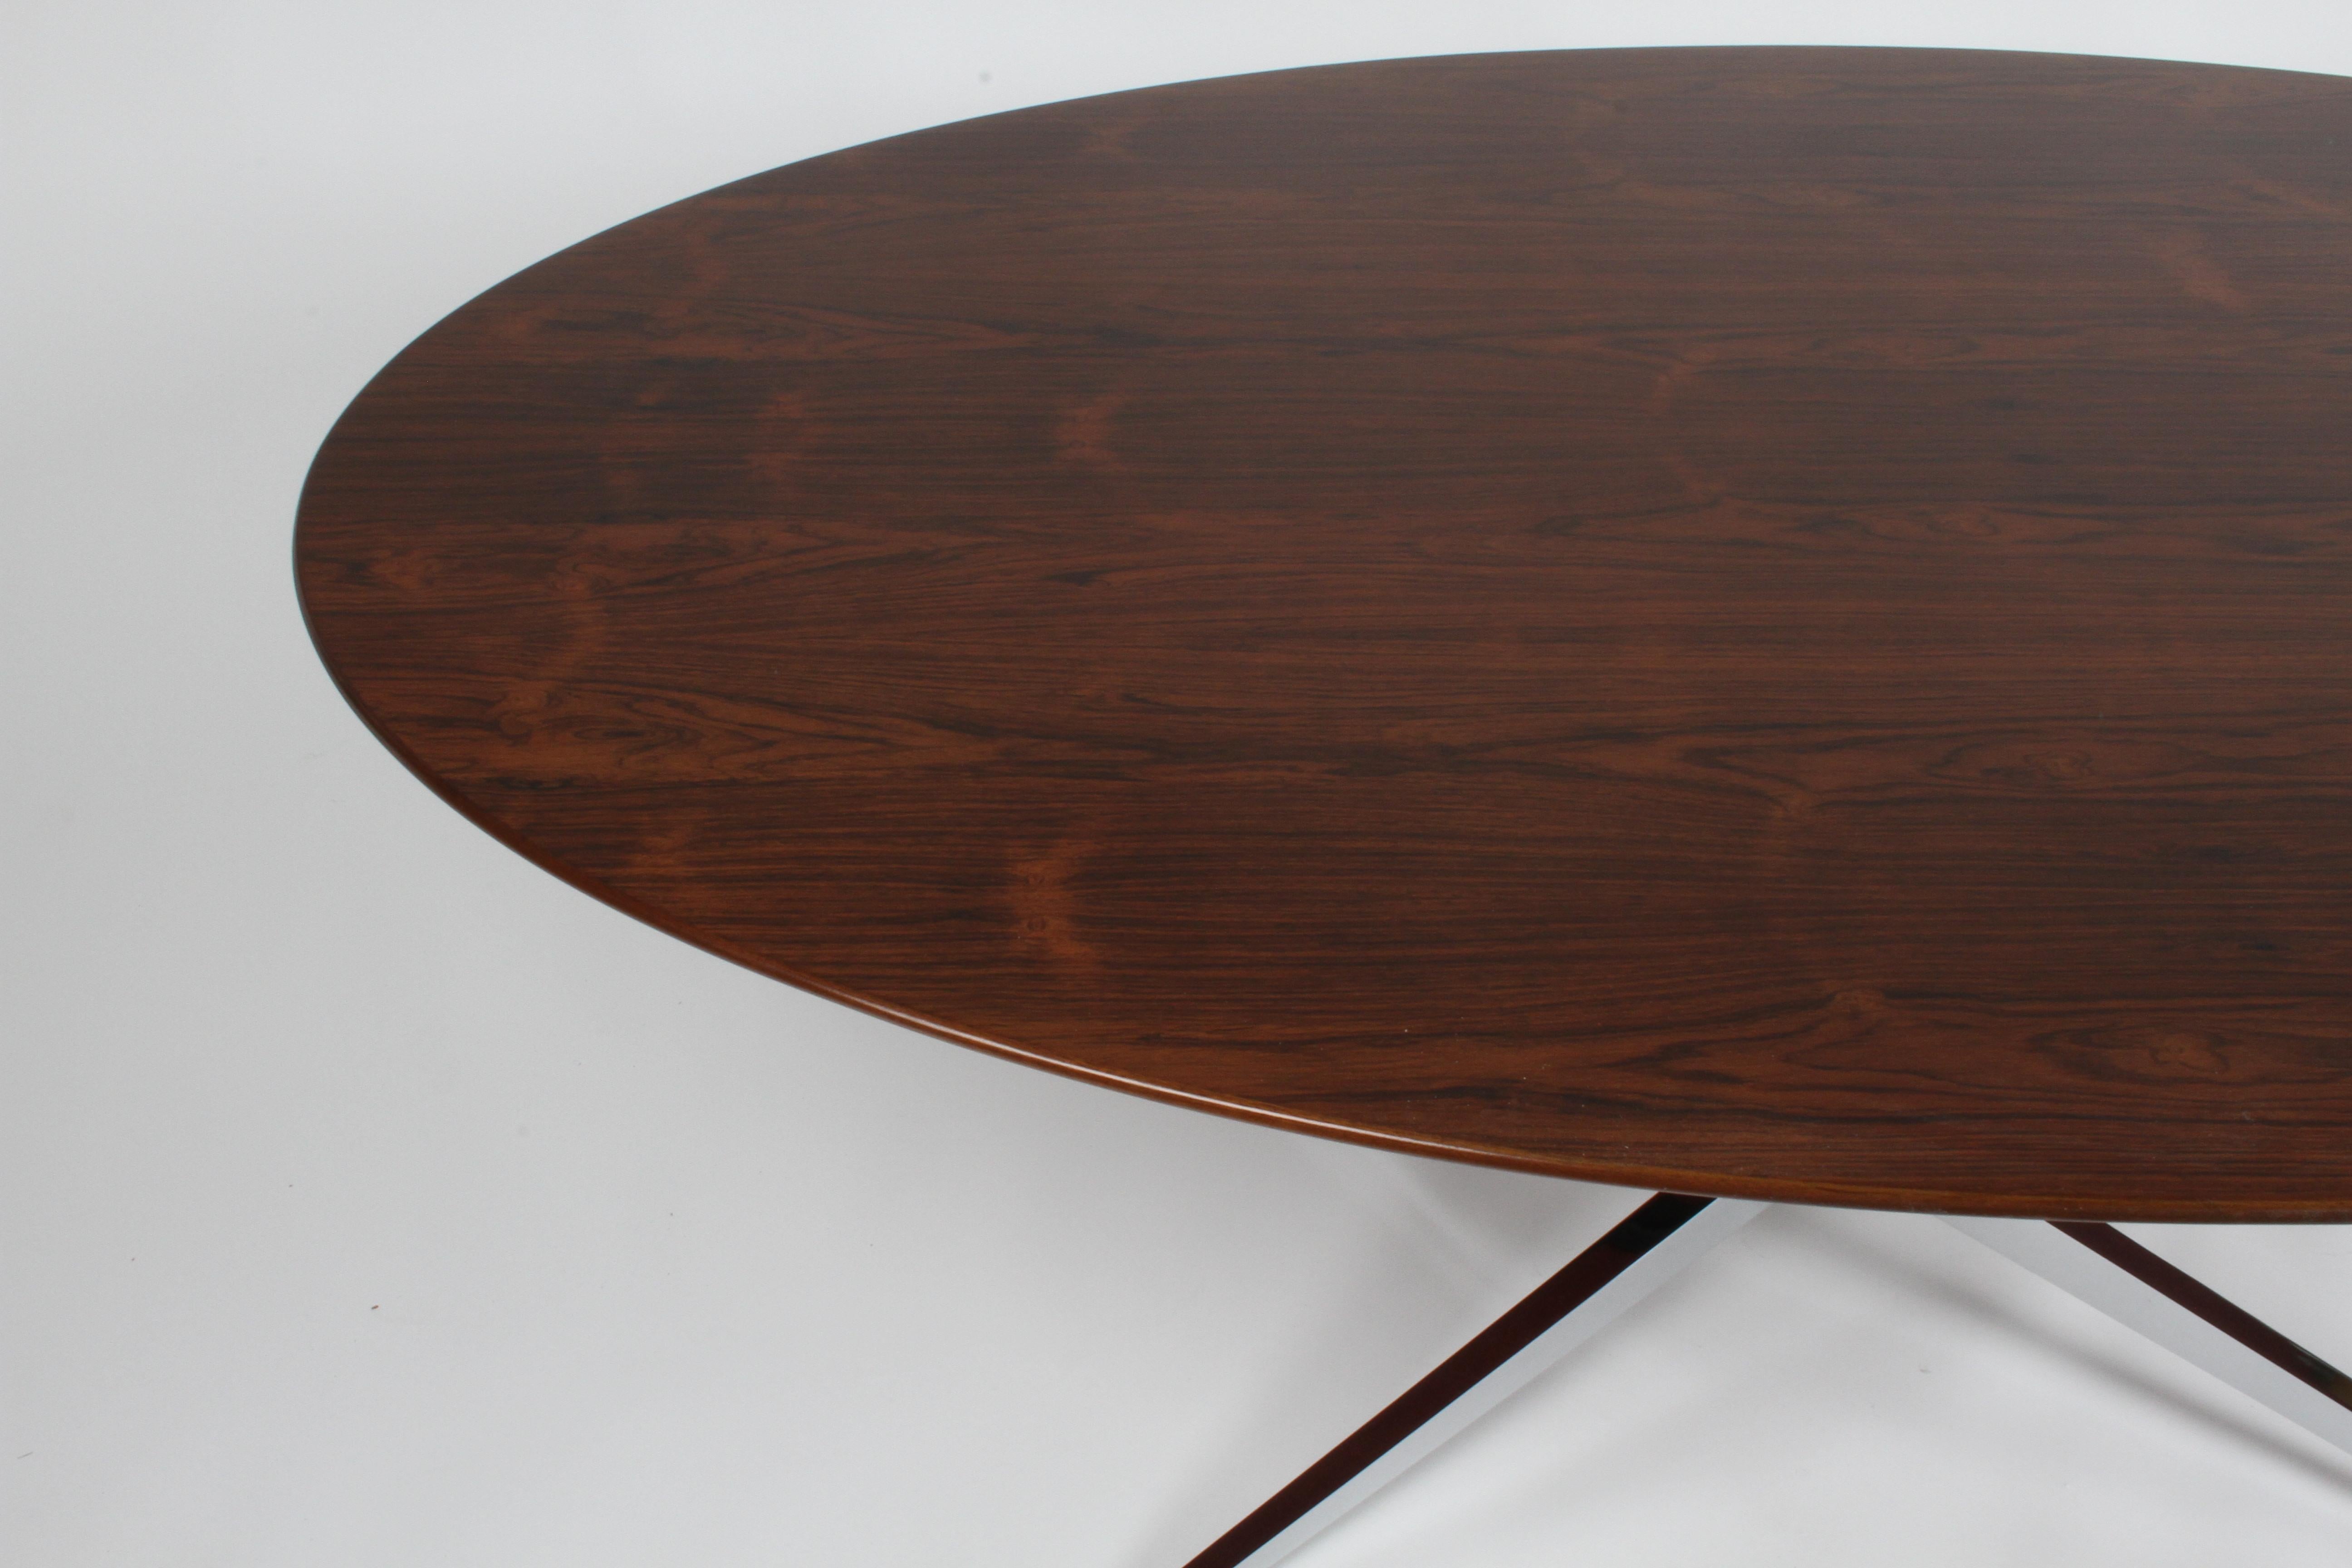 Restored Vintage Florence Knoll Oval Top Rosewood Dining or Conference Table For Sale 3